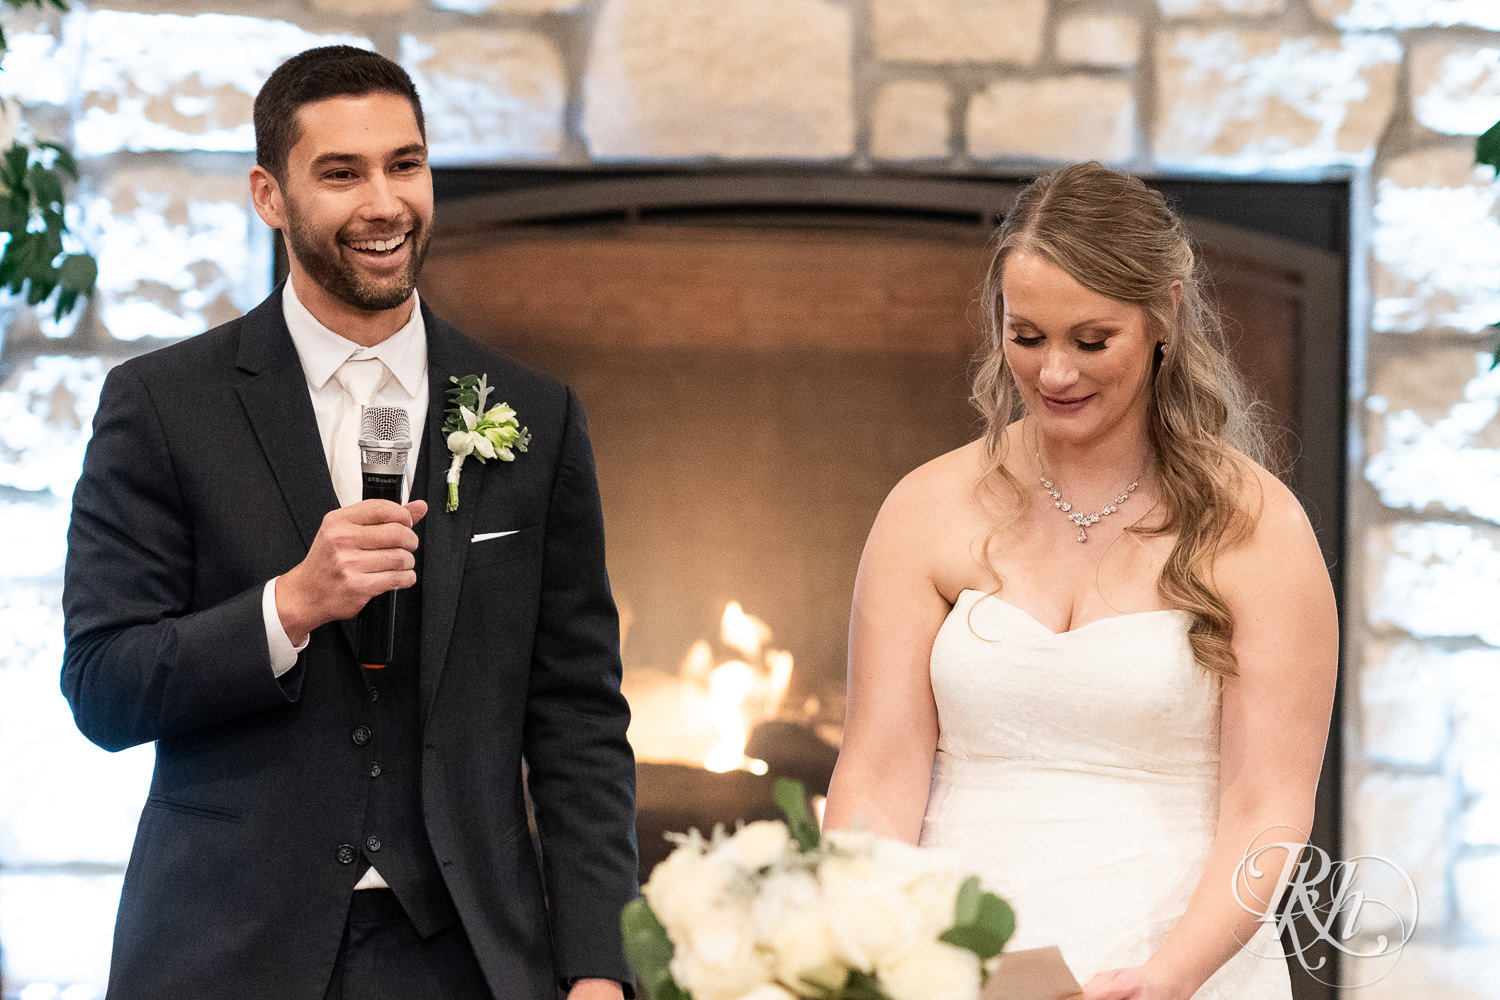 Bride and groom smile during speeches at wedding reception at Almquist Farm in Hastings, Minnesota.